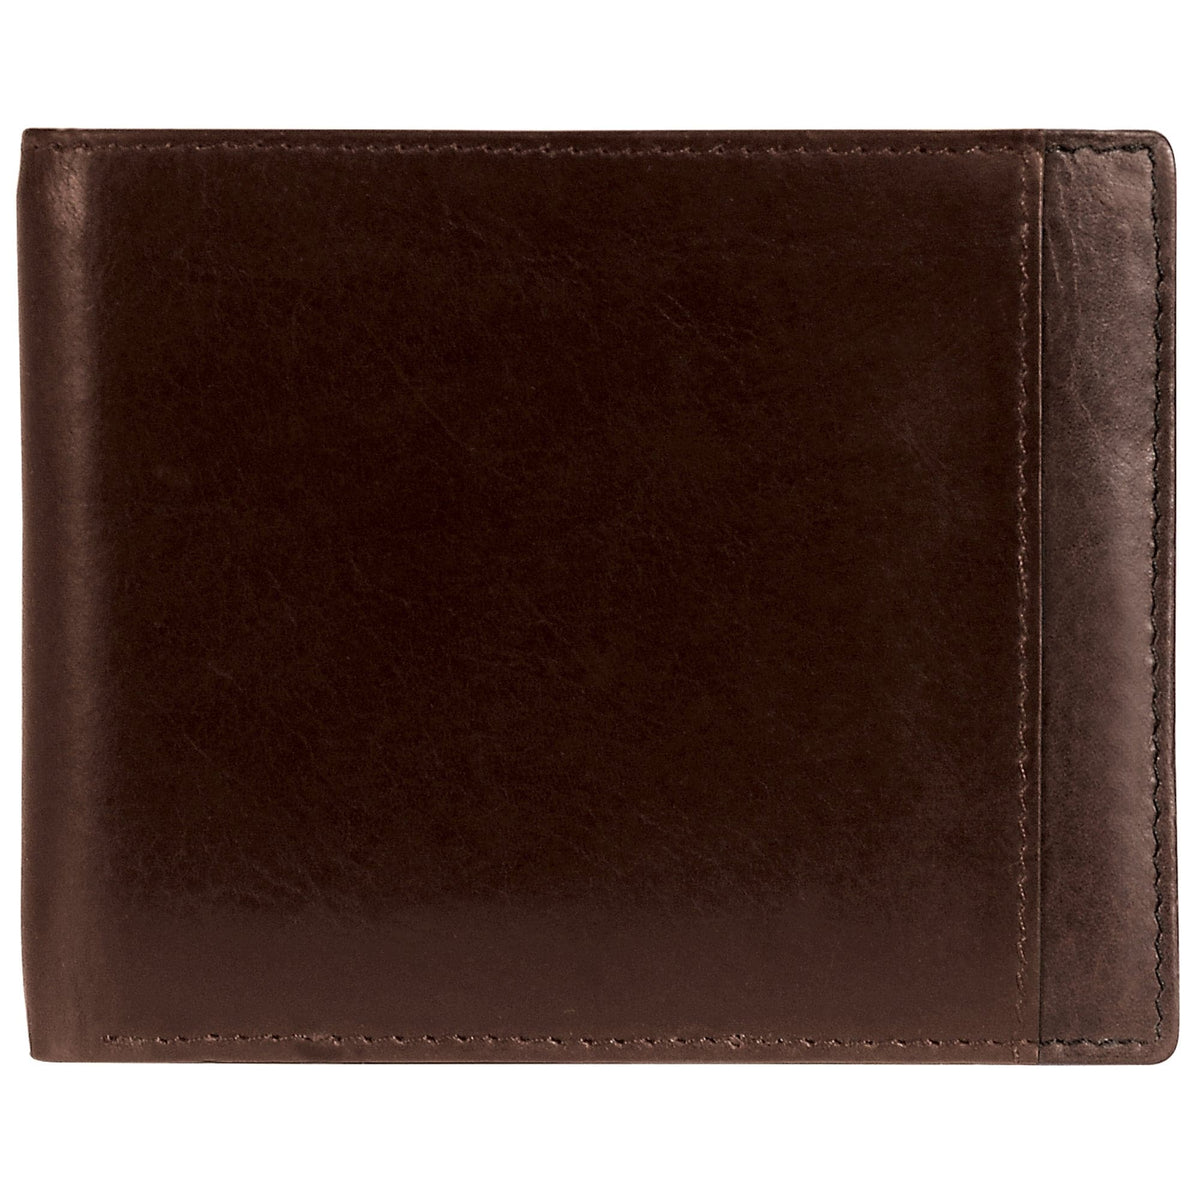 Mancini Casablanca Men's RFID Secure Billfold with Removable Passcase